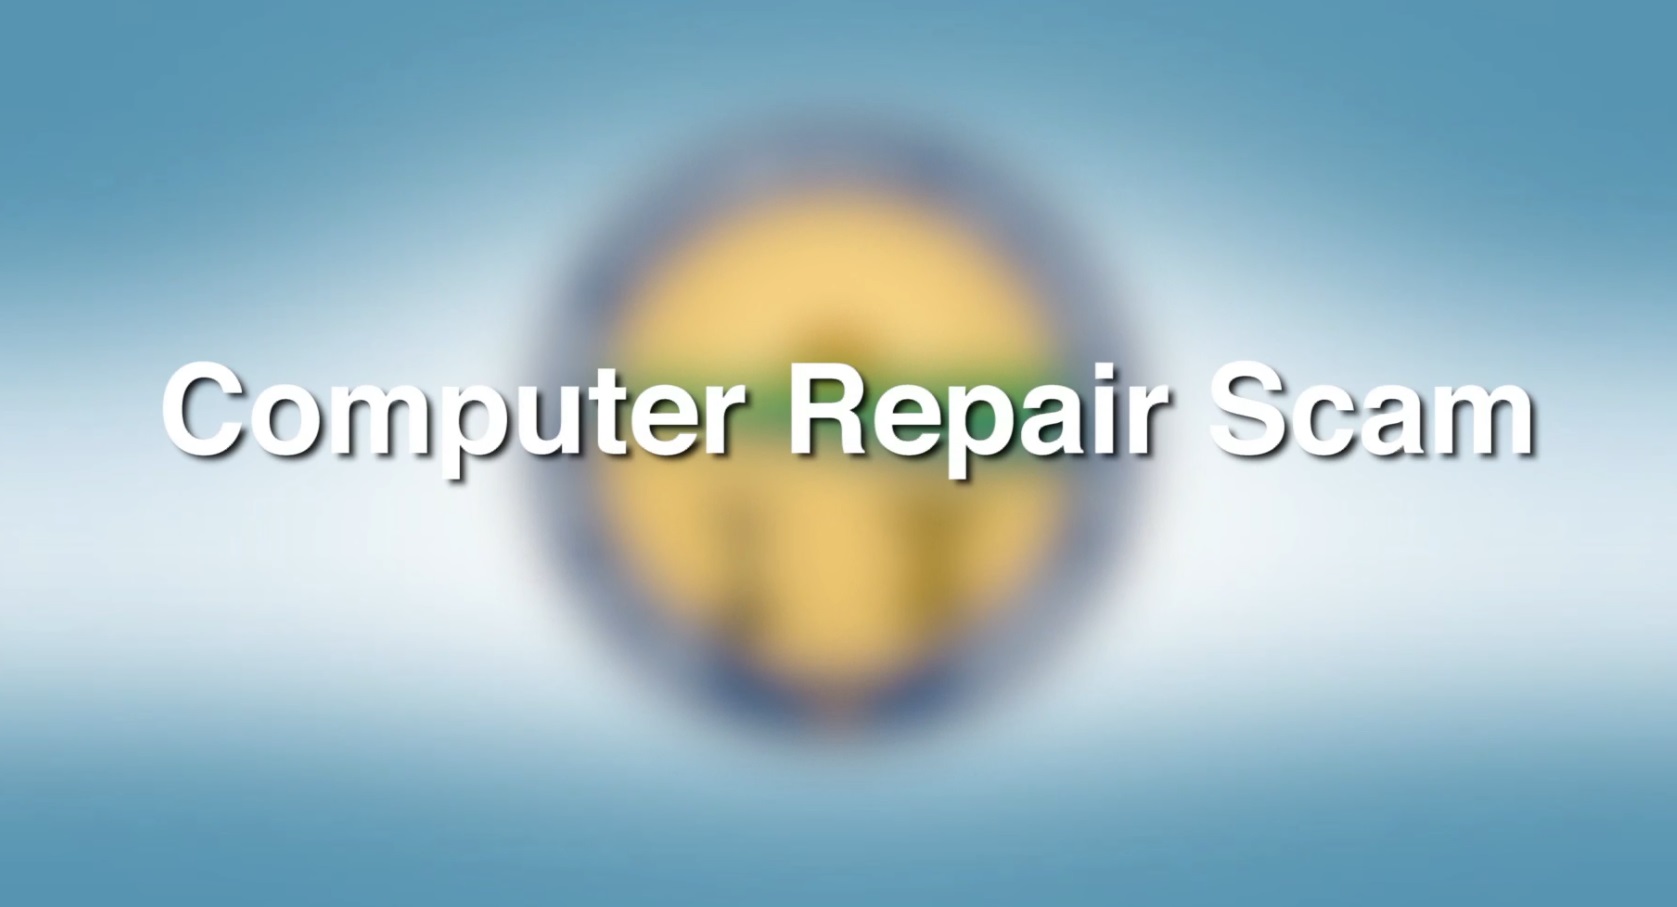 National Consumer Protection Week Video Tip: Computer Repair Scam